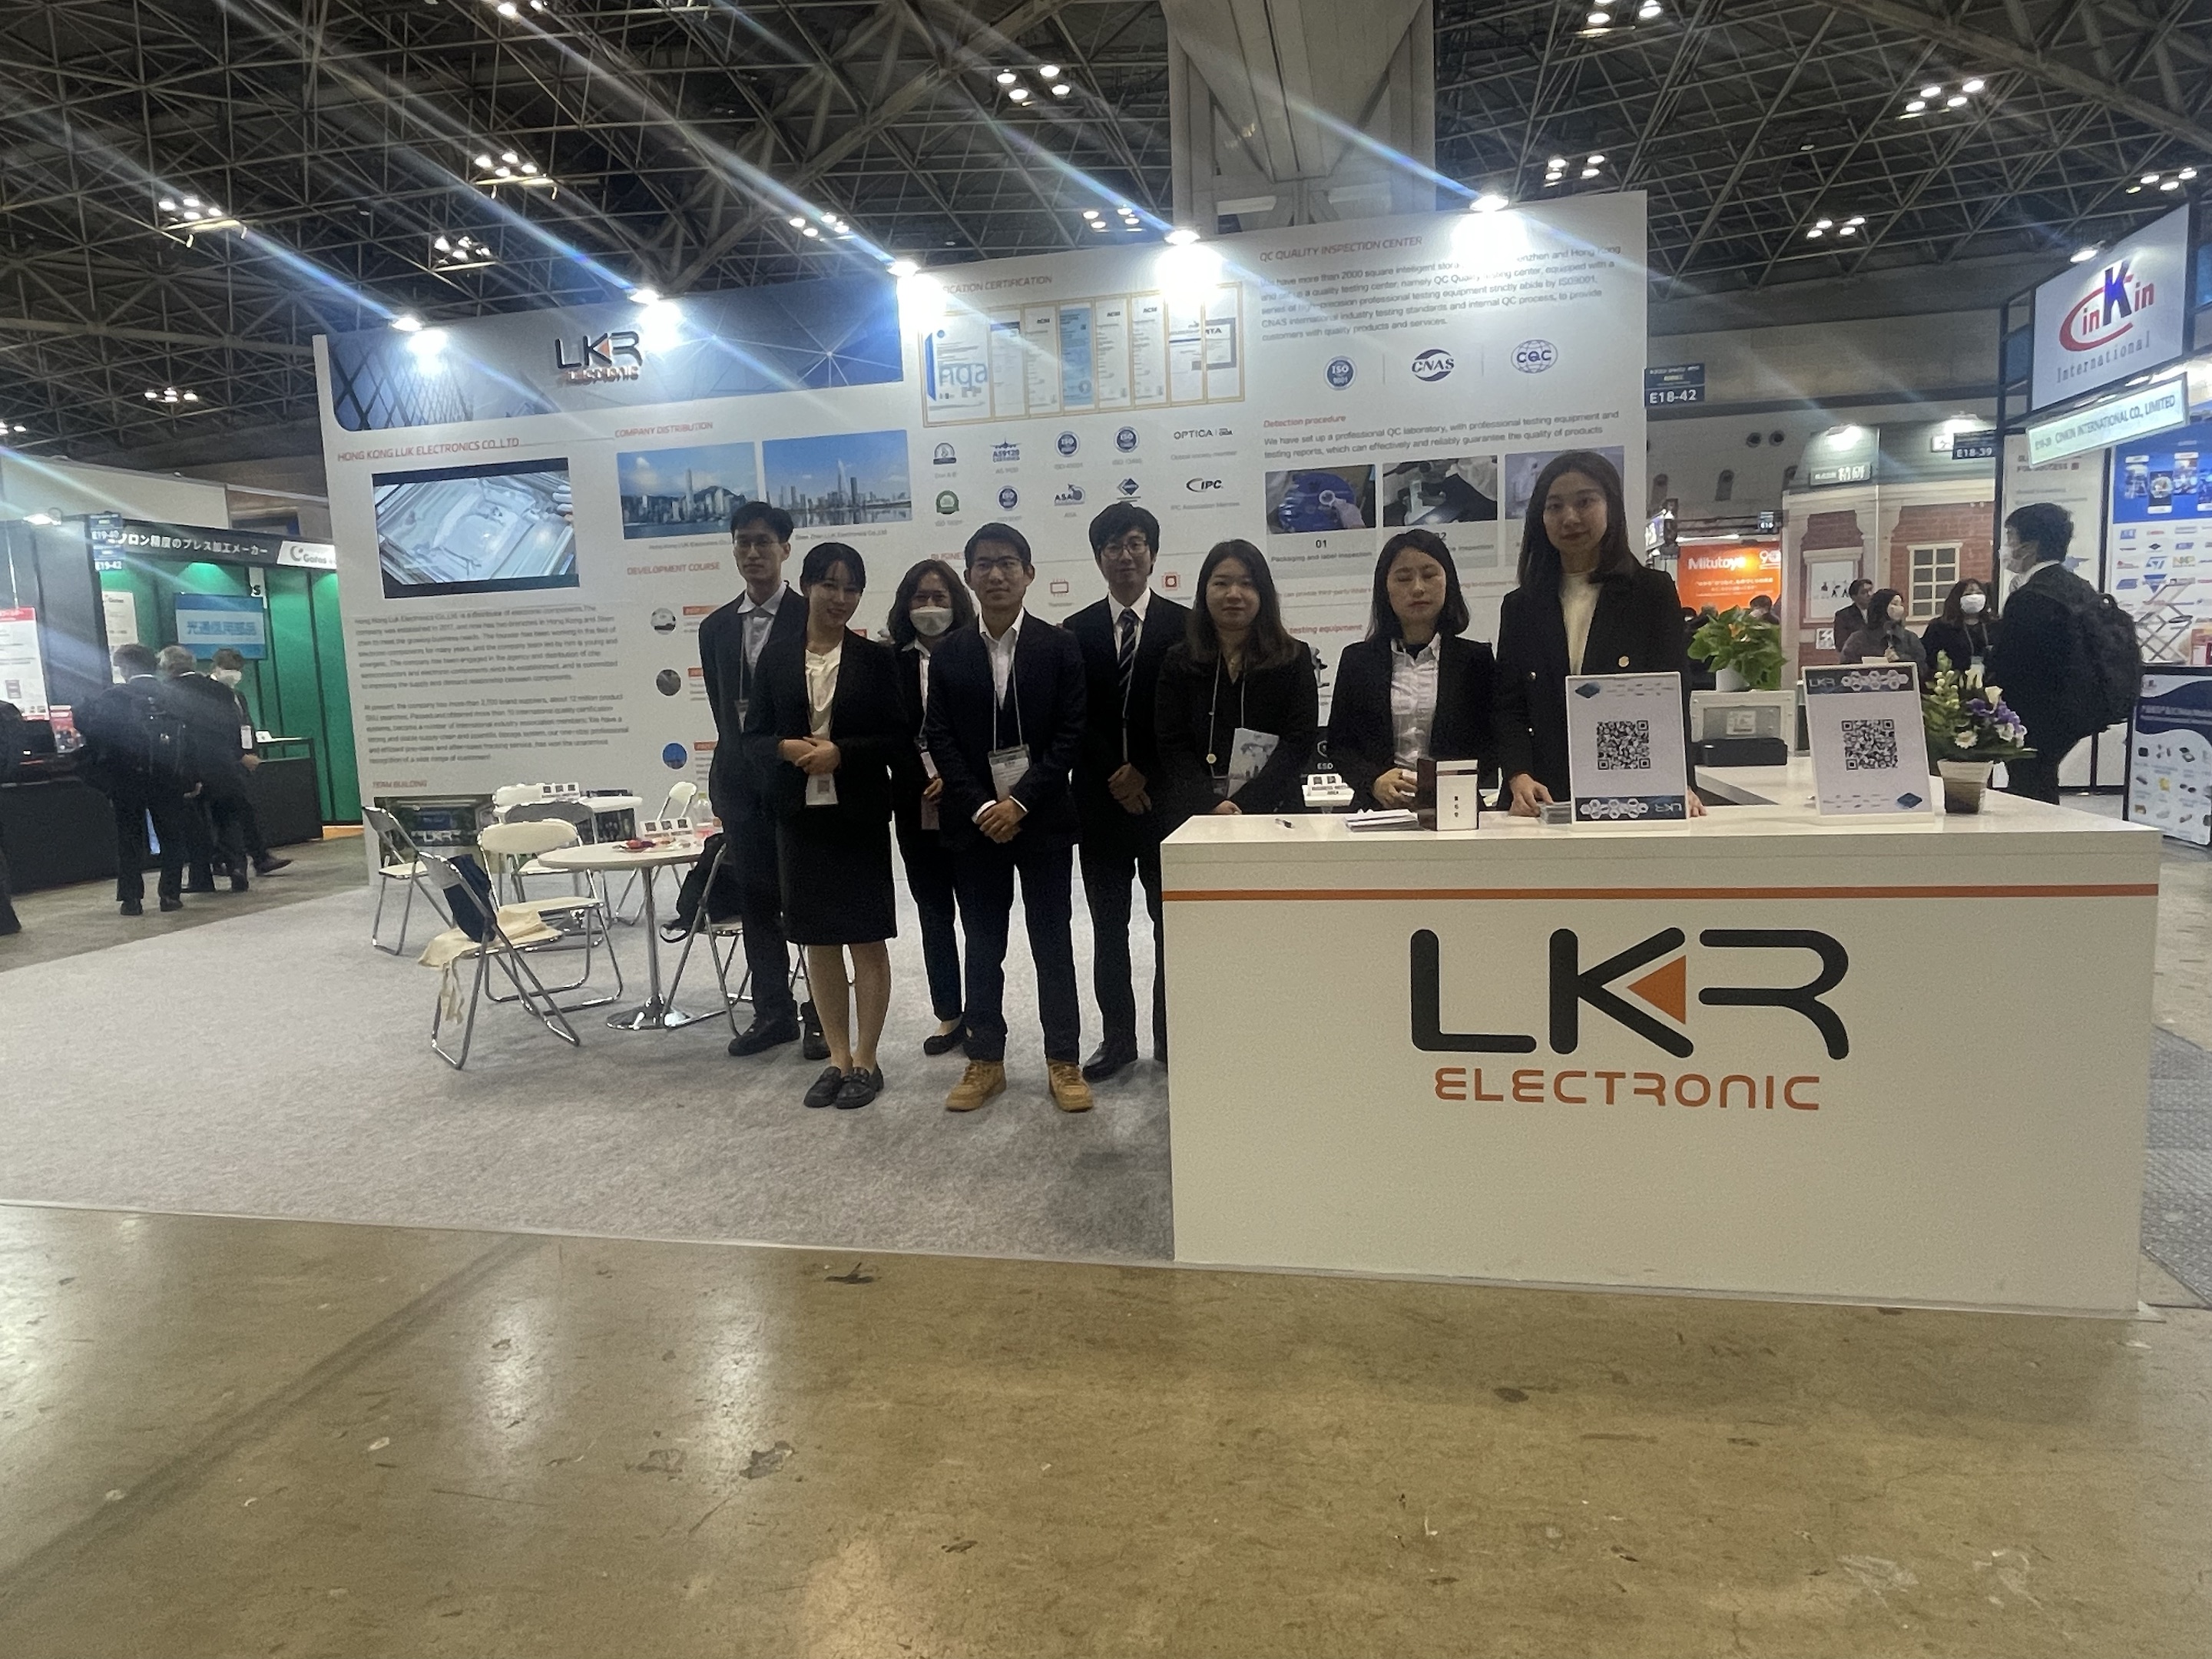 LKR made its debut at the Tokyo Electronic Components and Materials Manufacturing Equipment Exhibition in Japan.